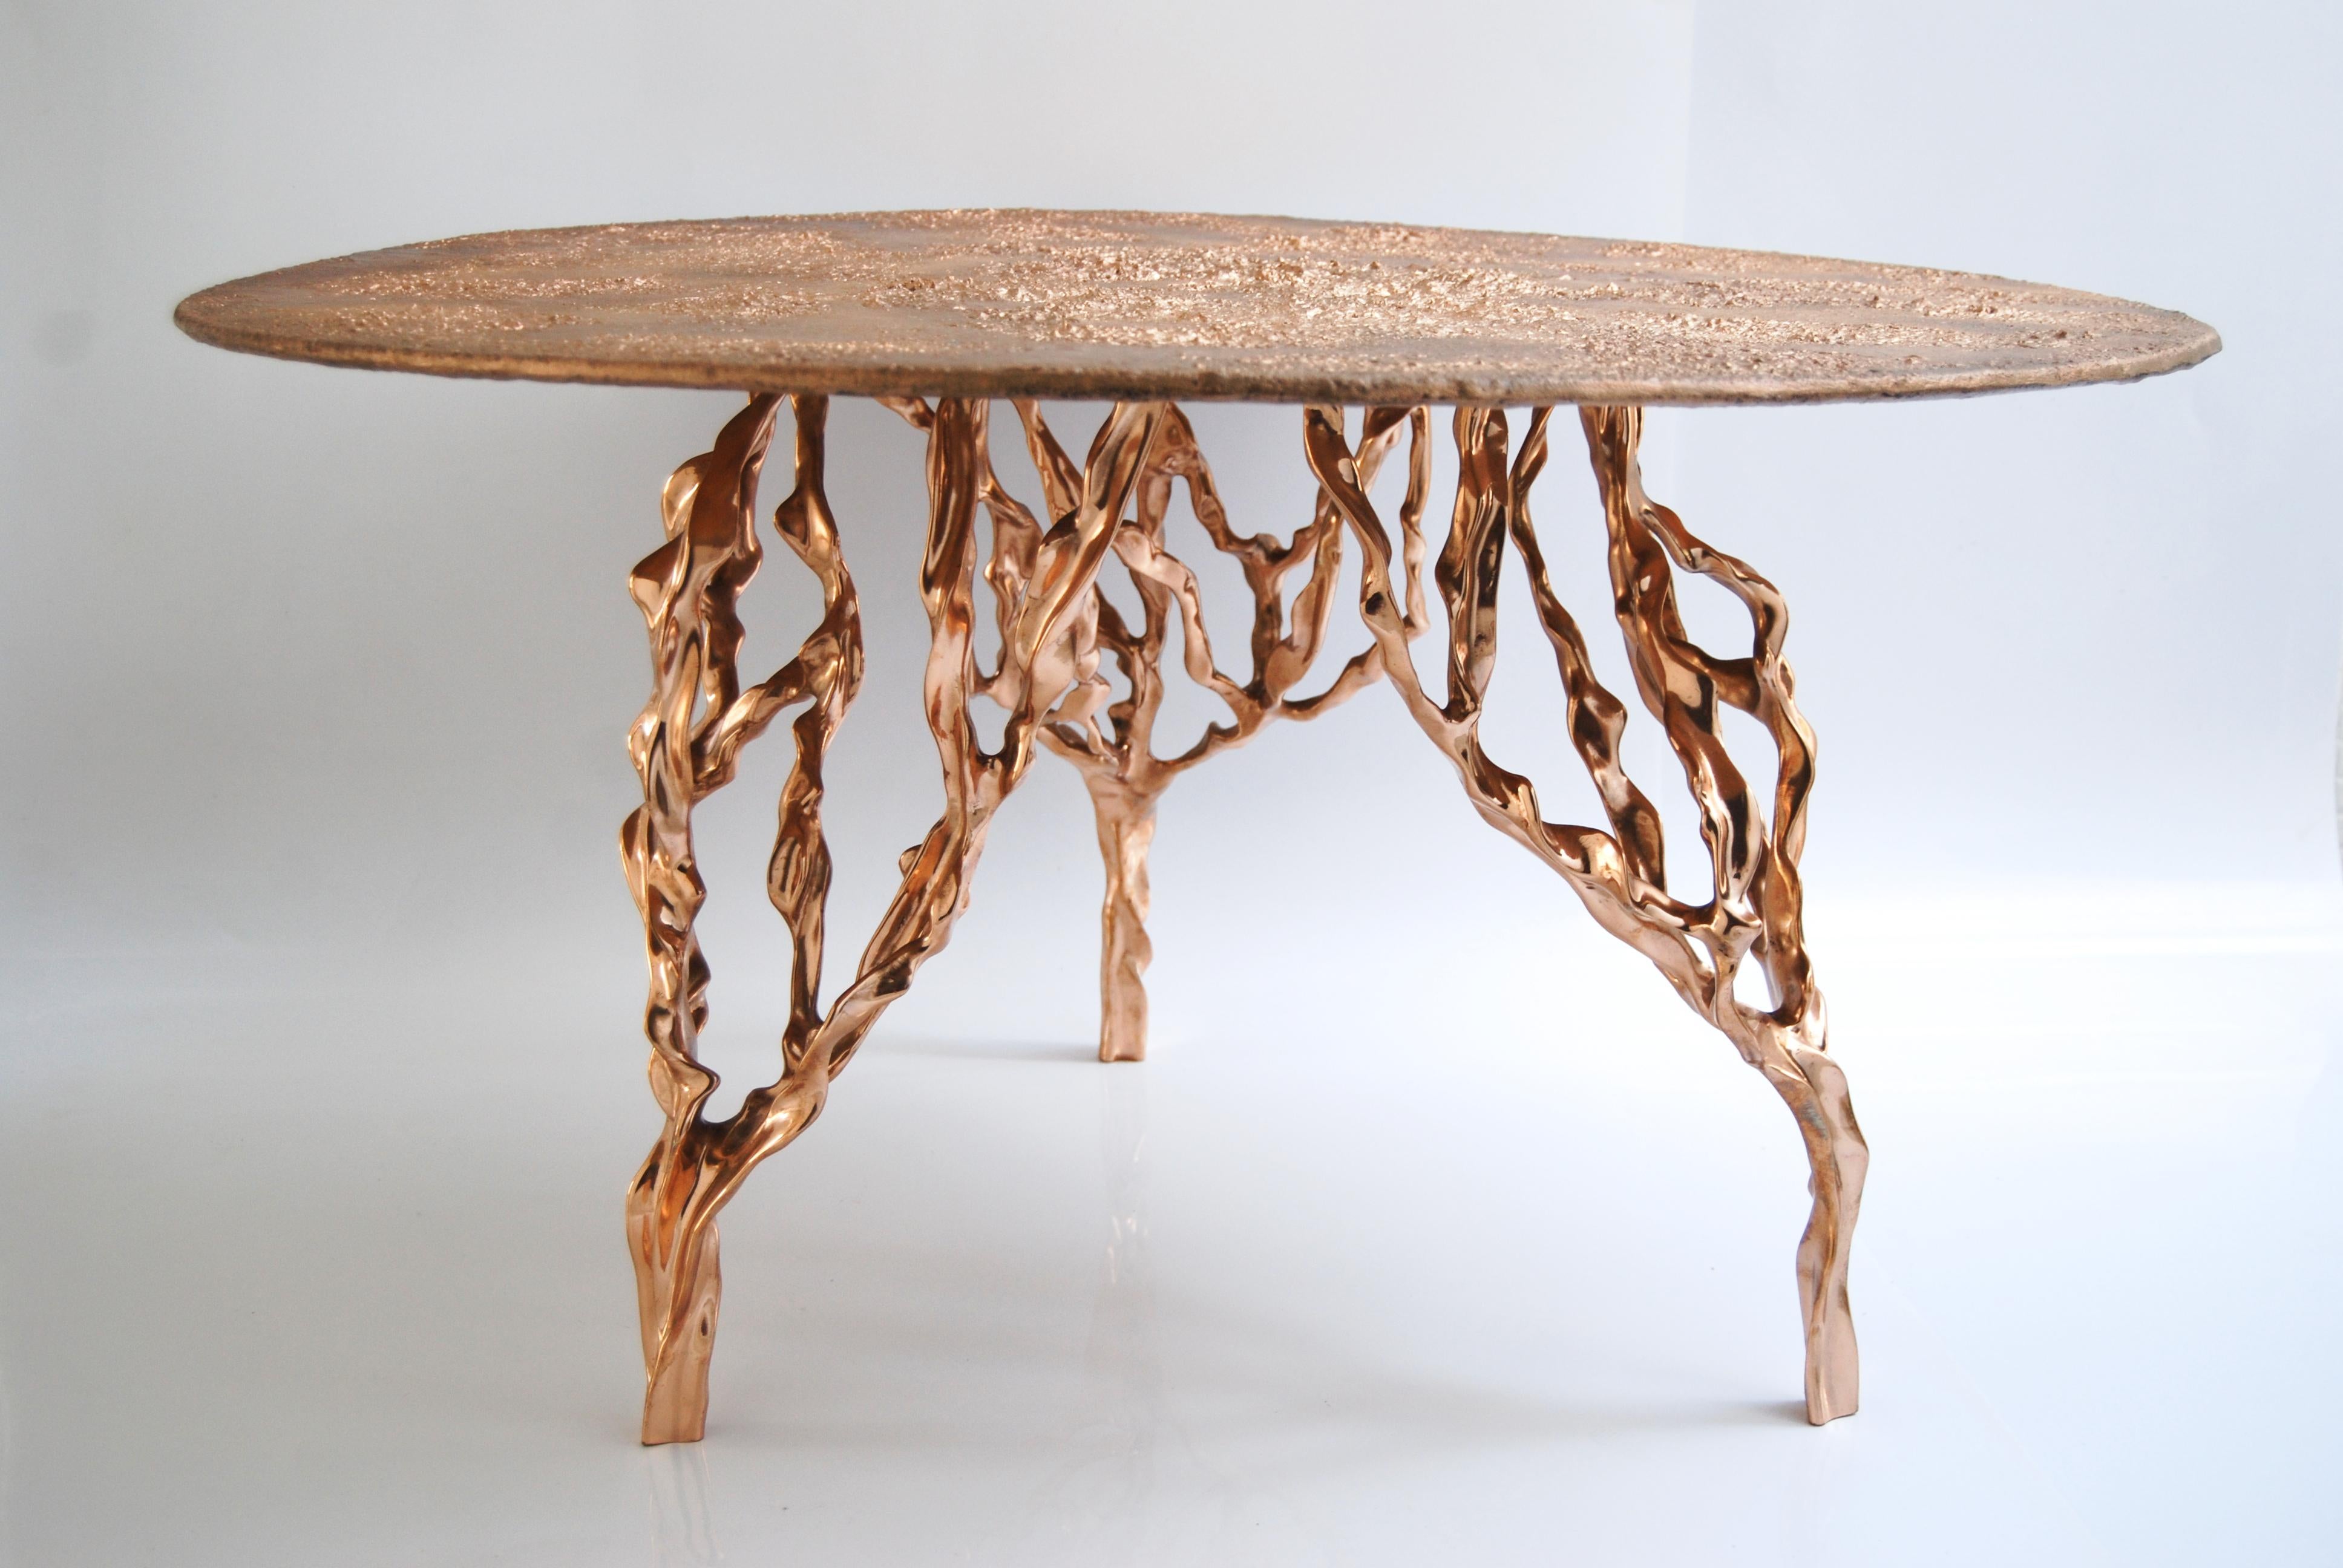 Polished bronze table by FAKASAKA Design
Dimensions: W 84 x D 84 x H 46.5 cm
Materials: Polished bronze.

 